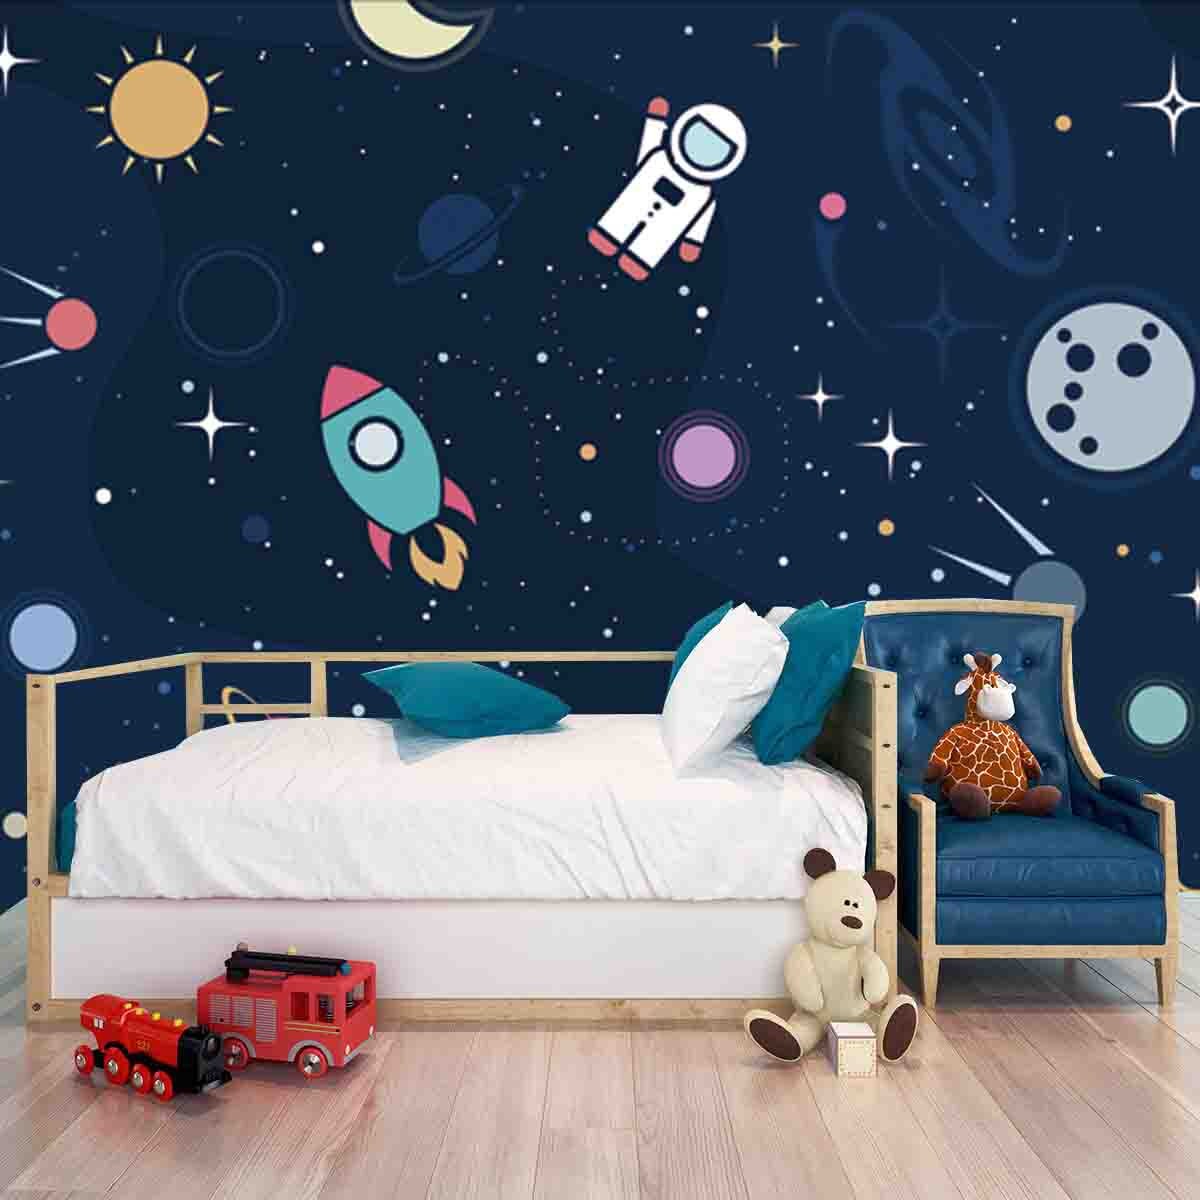 Astronaut, Spaceship, Rocket, Moon, Black Hole, Stars in Outer Space Wallpaper Little Boy Bedroom Mural